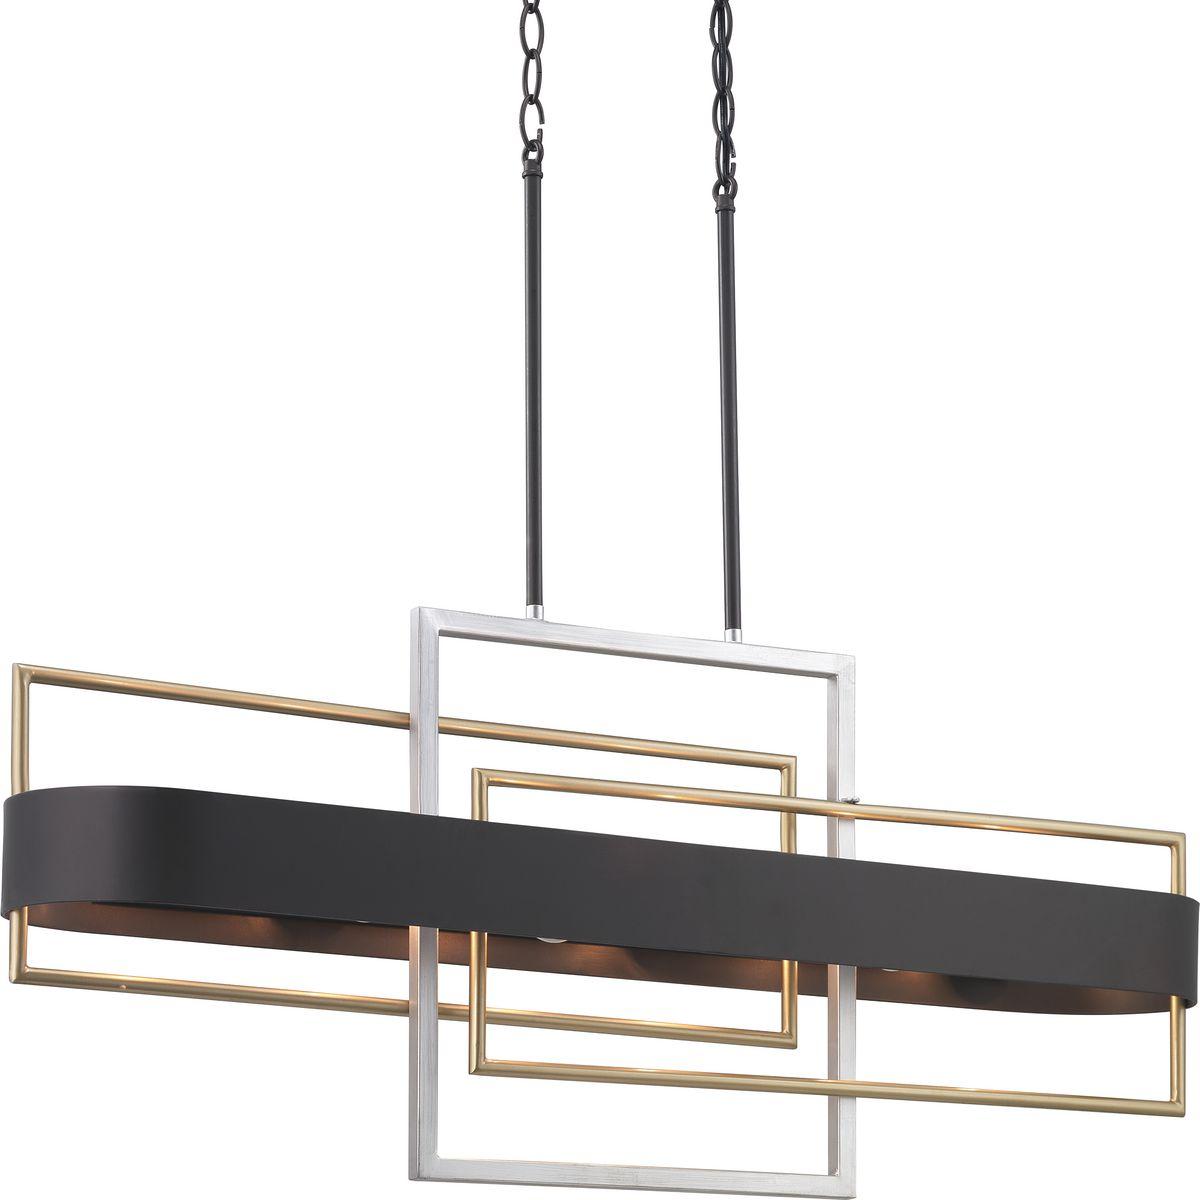 Hubbell P400170-031 An array of geometric patterns in Adagio six-light linear chandelier is a nod to the musical description of a tender and melodic tone. The modern design features lights that are distributed around a circular Black band. Mixed metal elements, which are pre